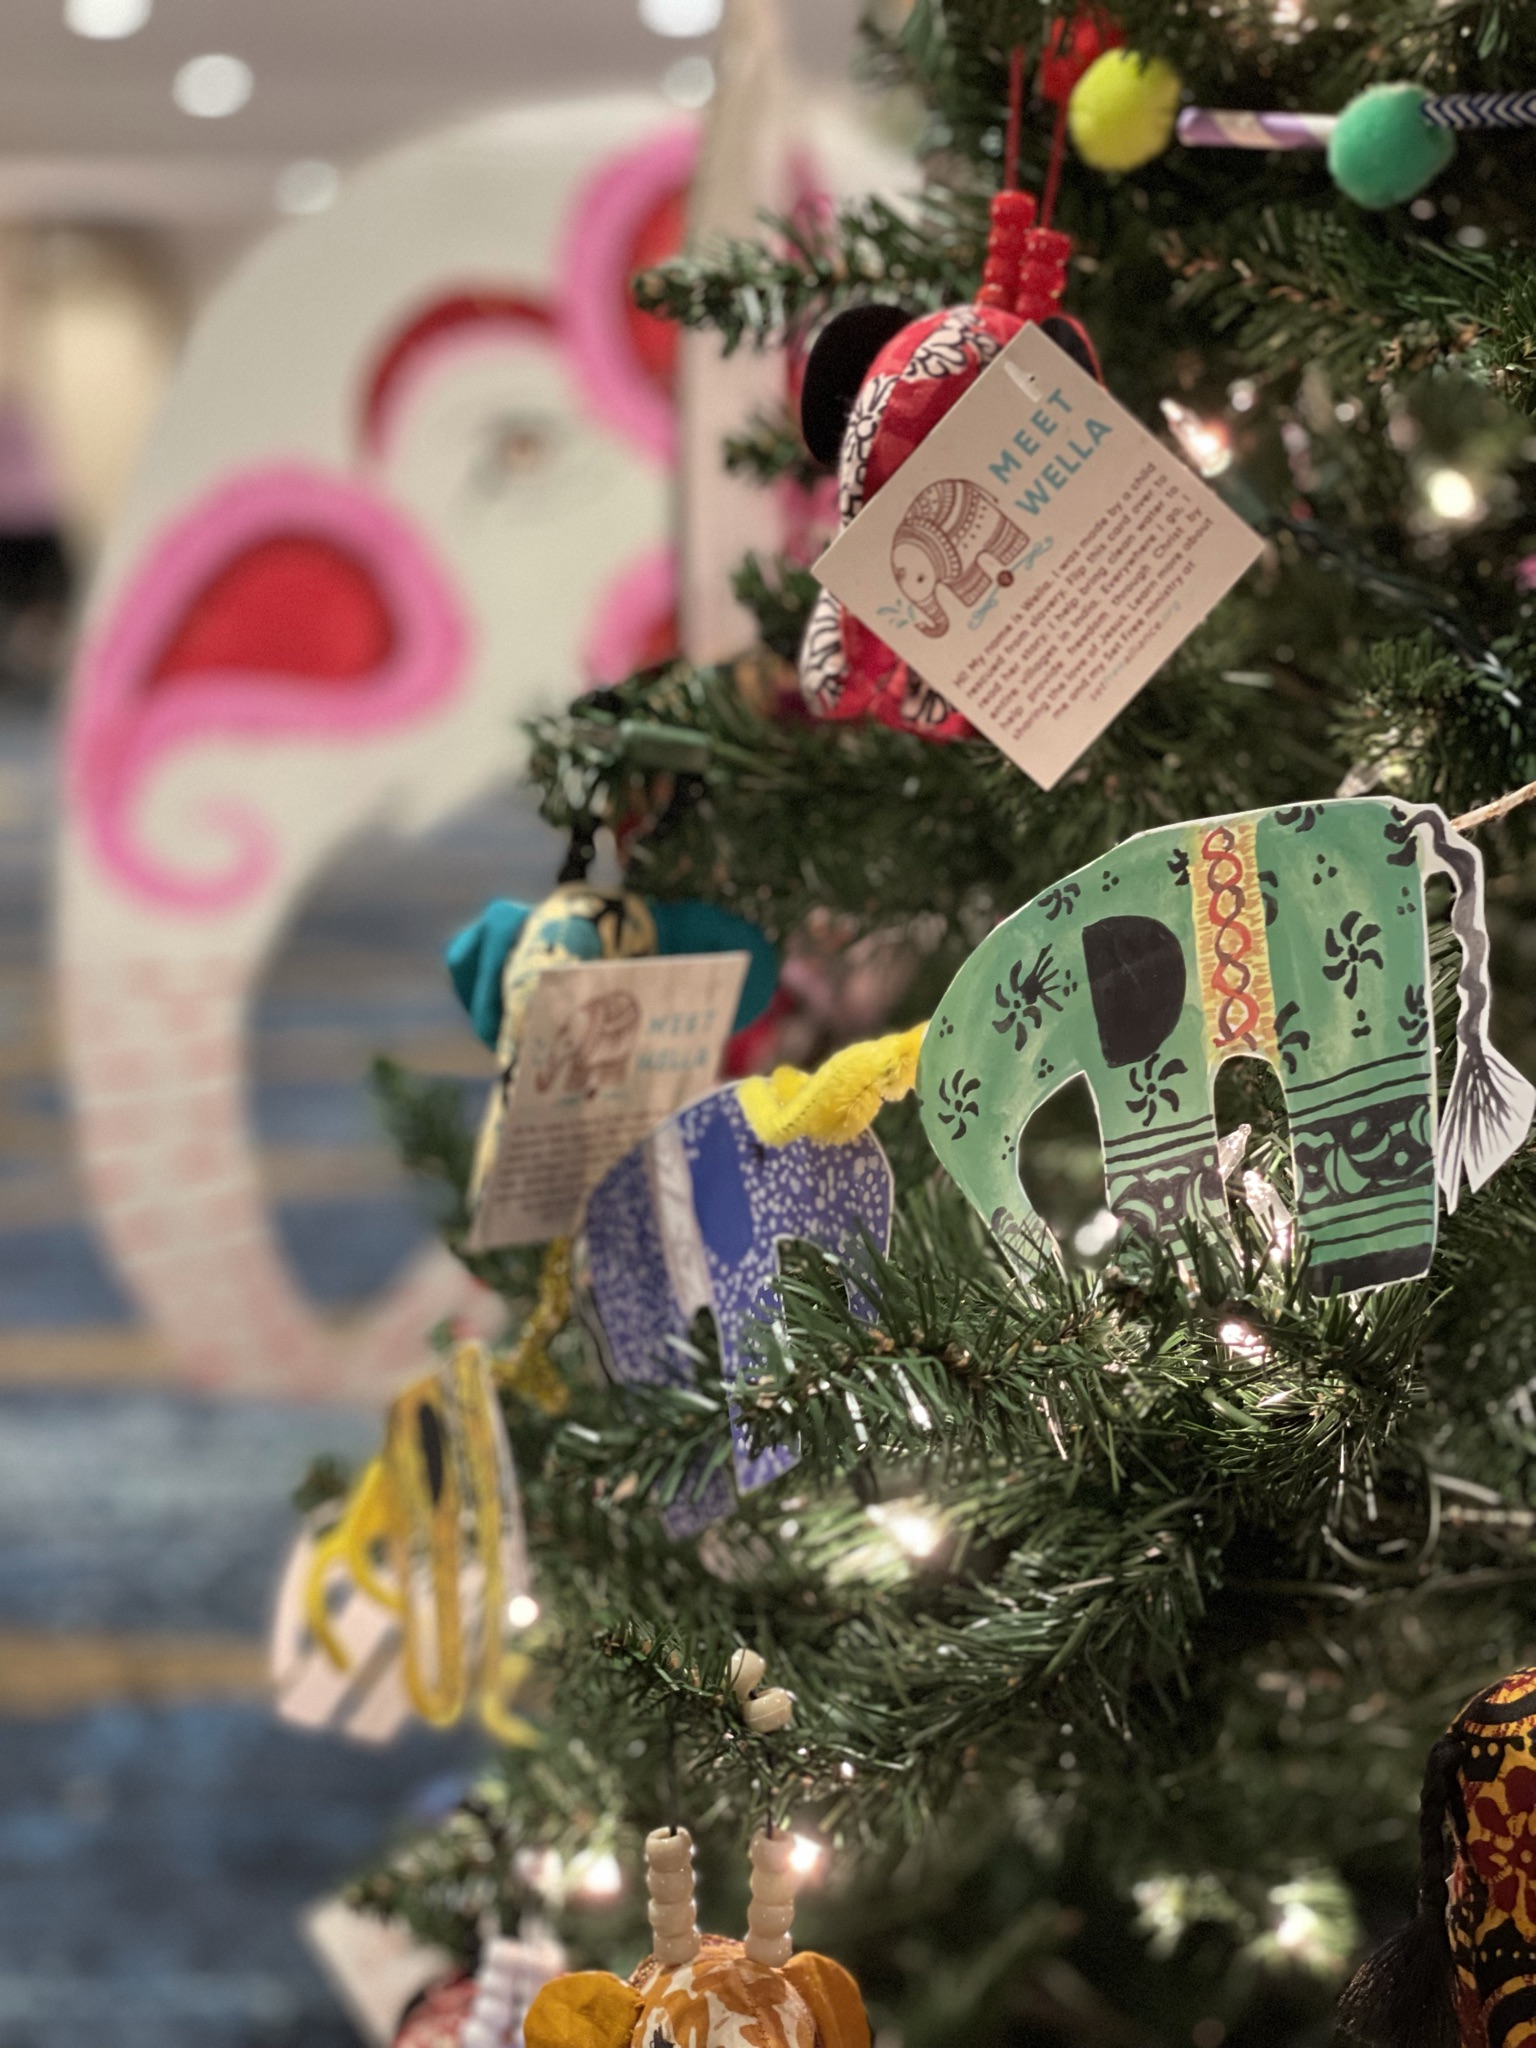 Our Greenville Festival of Trees Tradition